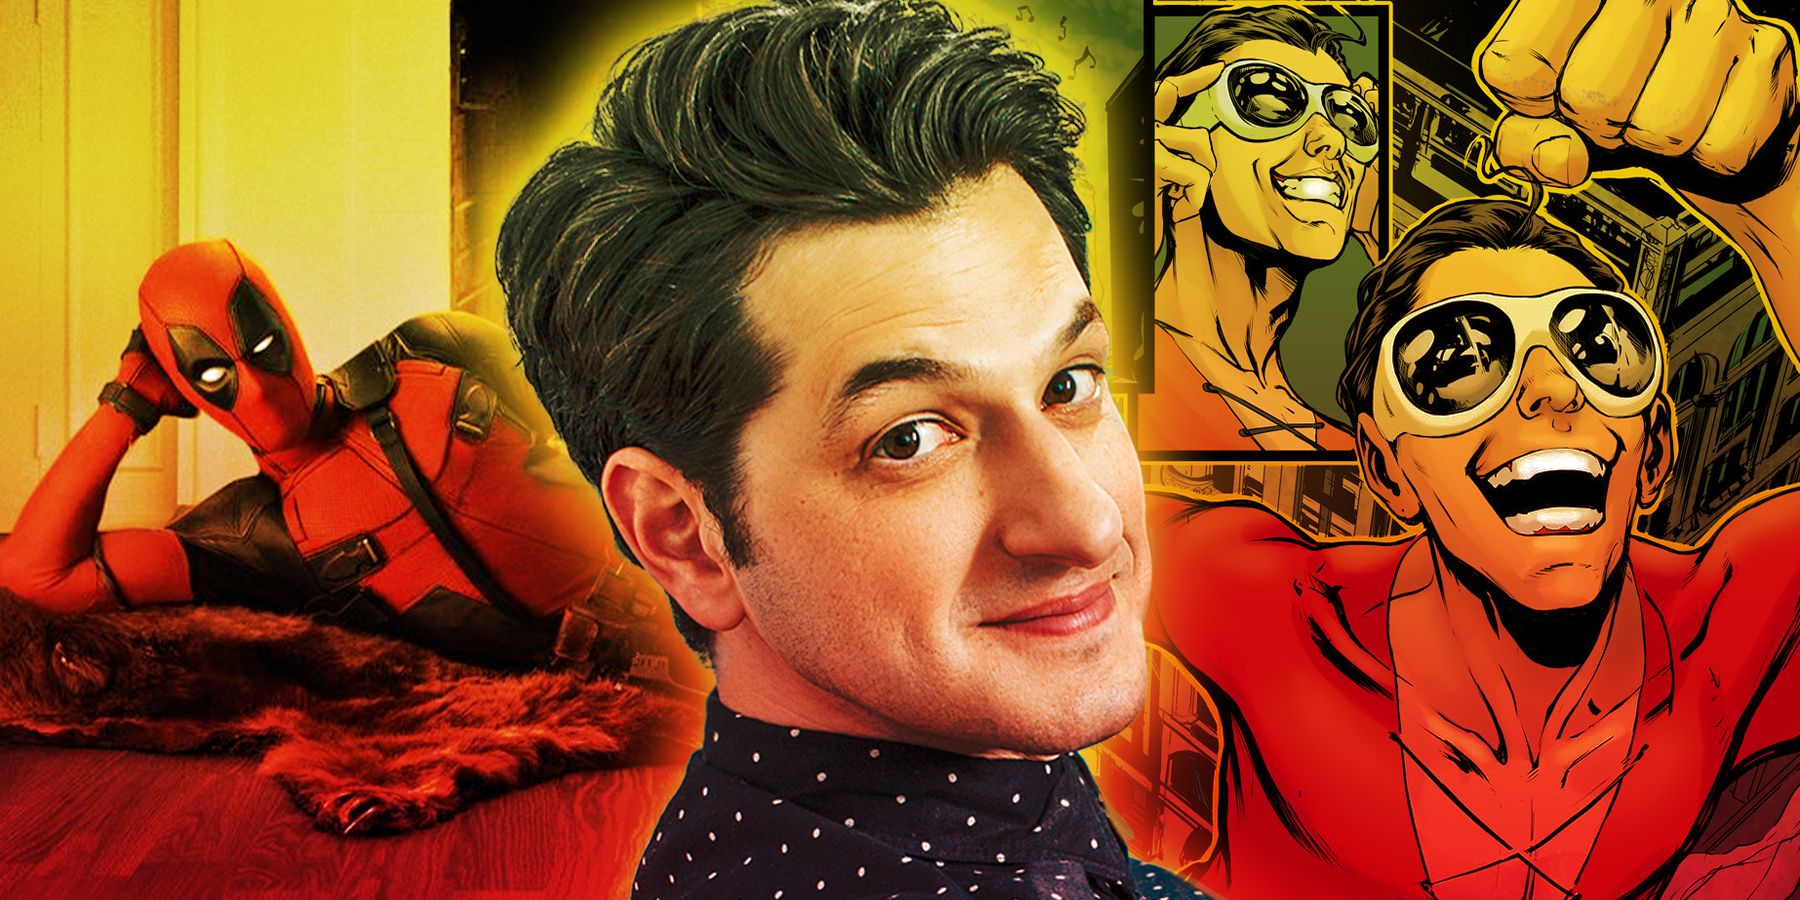 In the middle, Ben Schwartz looks on thoughtfully with a slight smile. To his left, Deadpool lays on a bear skin rug in front of a fire. On the right, Plastic Man is putting on his sunglasses and getting ready to charge forward. 